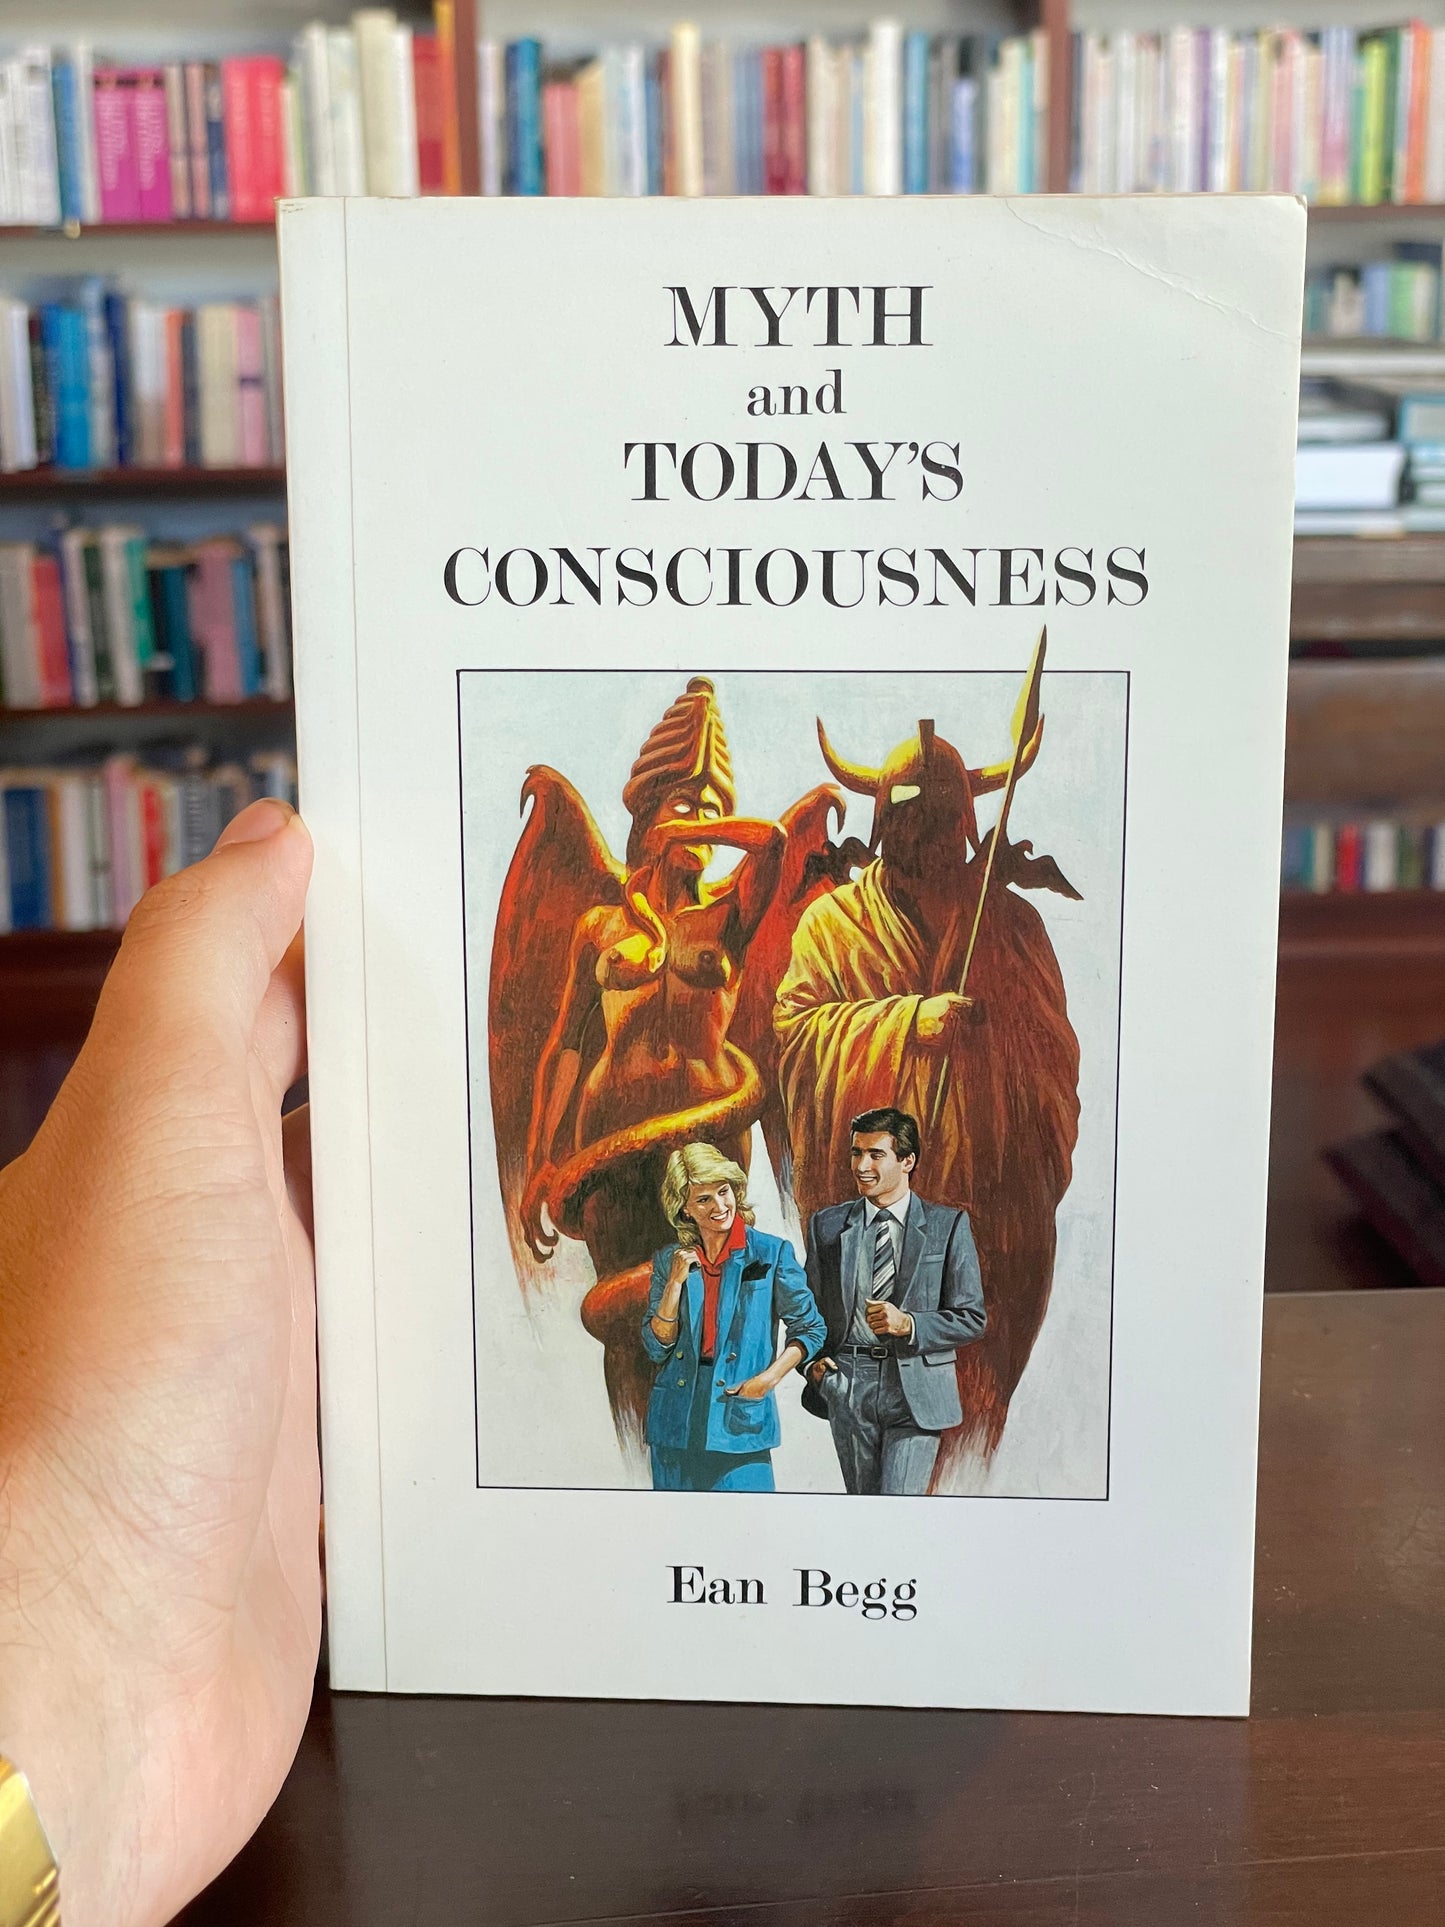 Myth and Today’s Consciousness by Ean Begg